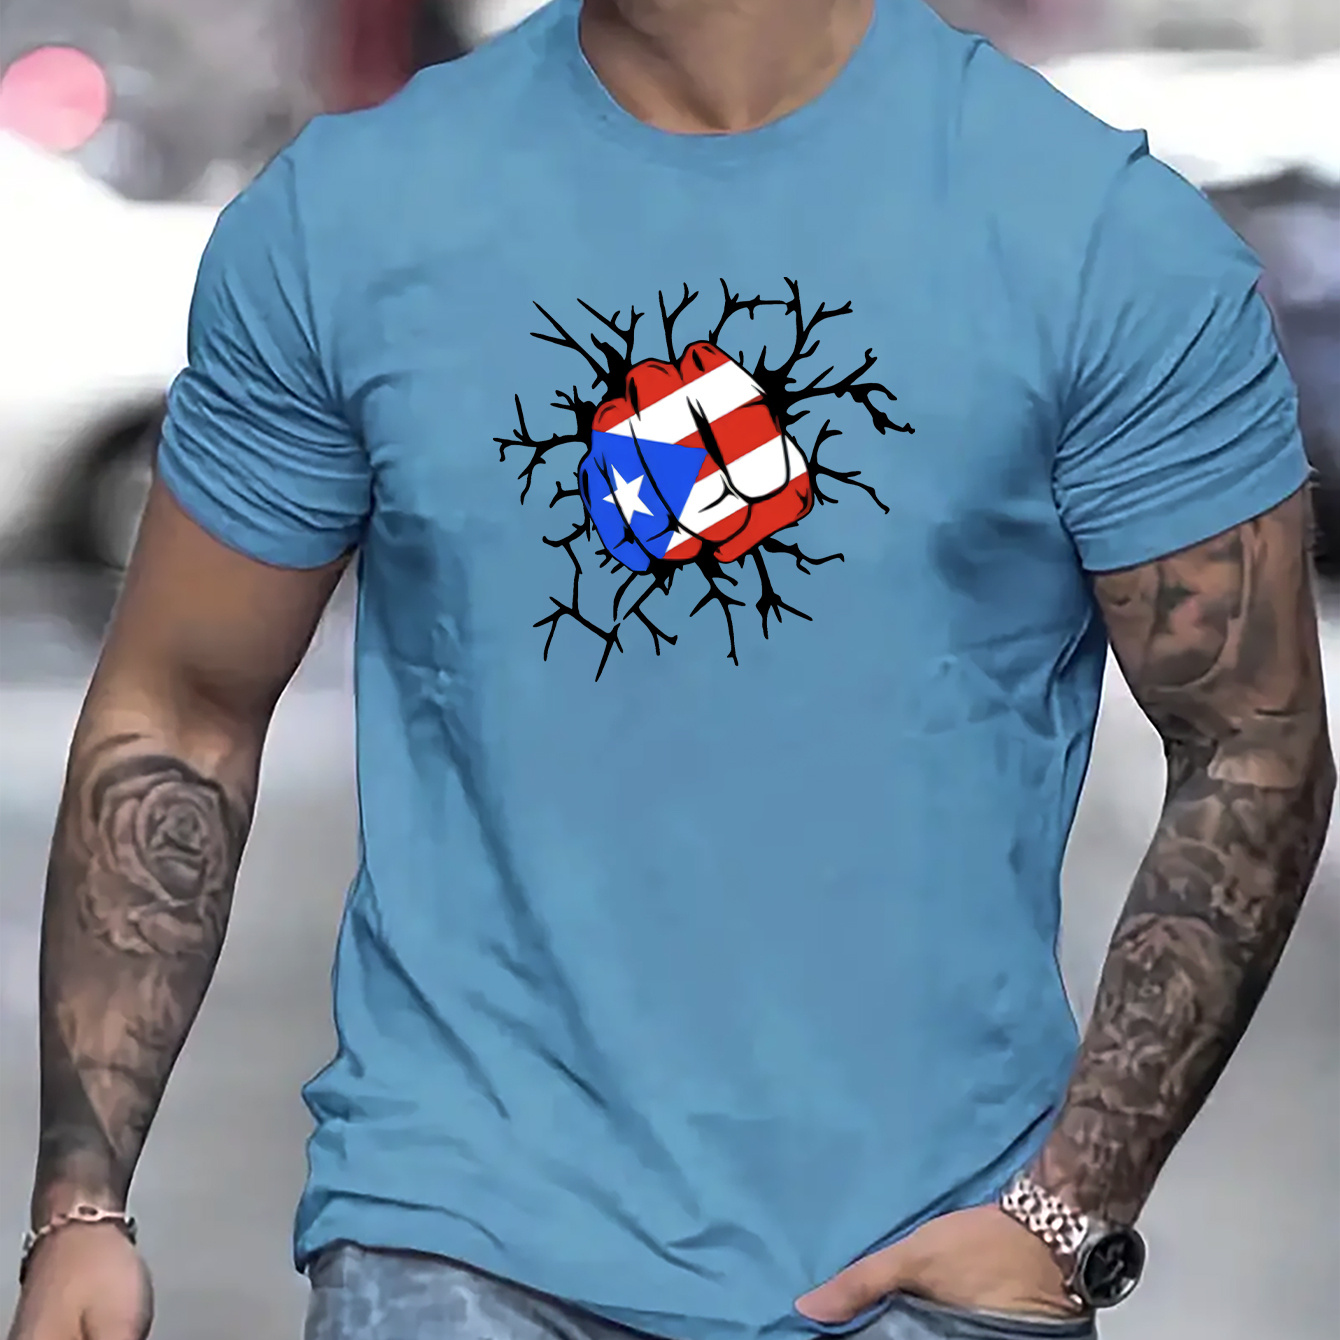 

Flag Of Puerto Rico Fist Print T Shirt, Tees For Men, Casual Short Sleeve T-shirt For Summer